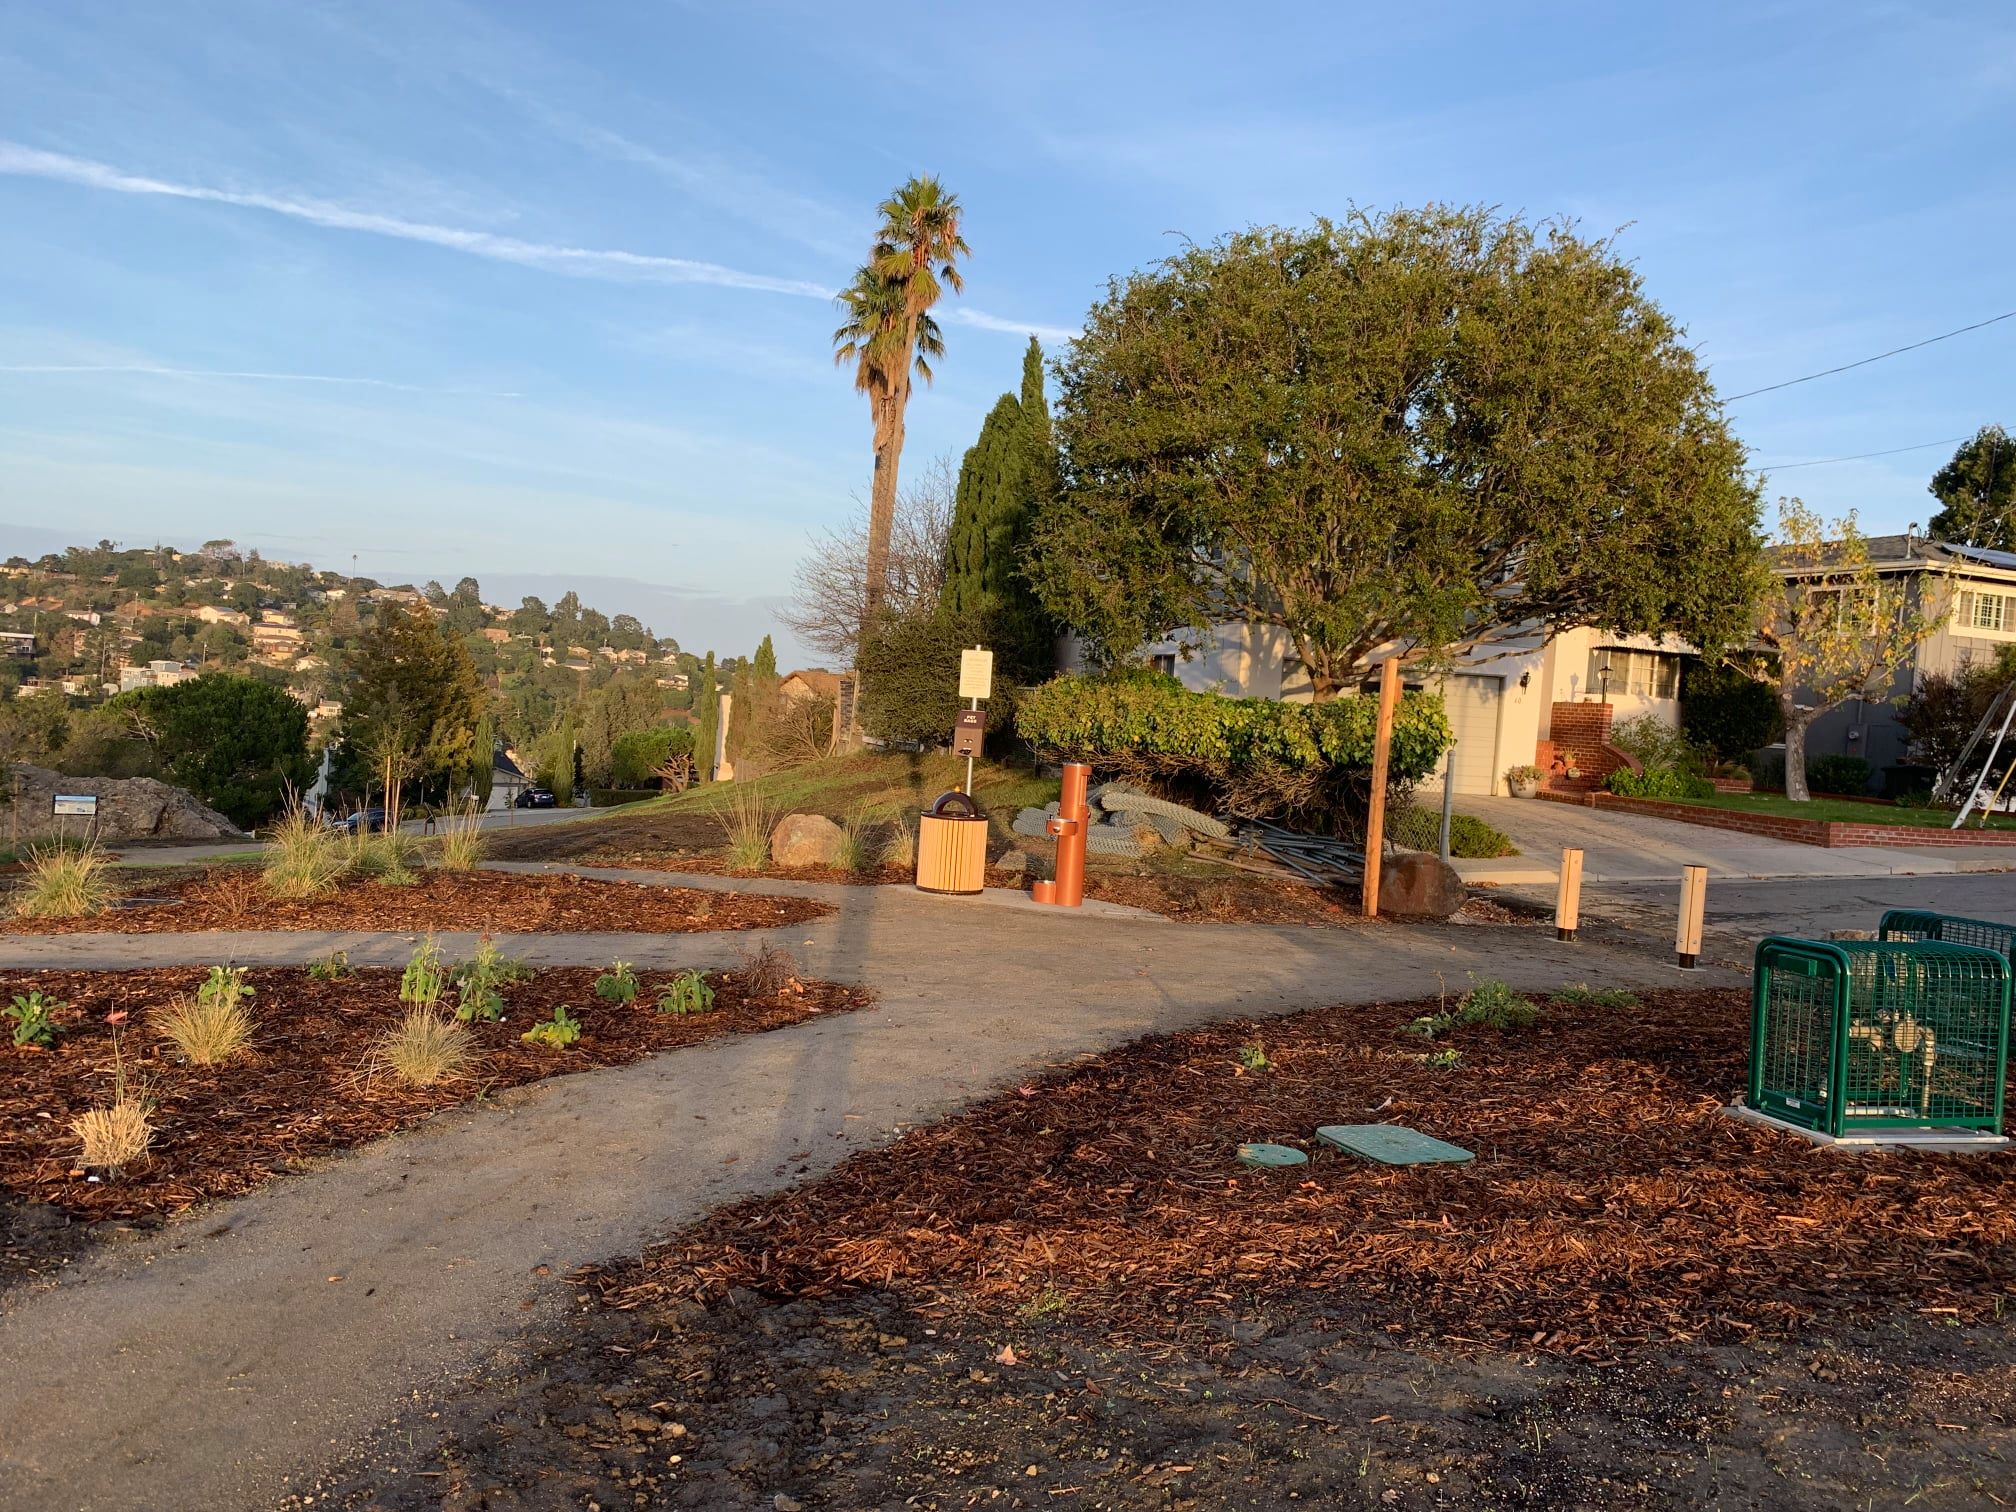 San Carlos announces reopening of improved Chilton Park